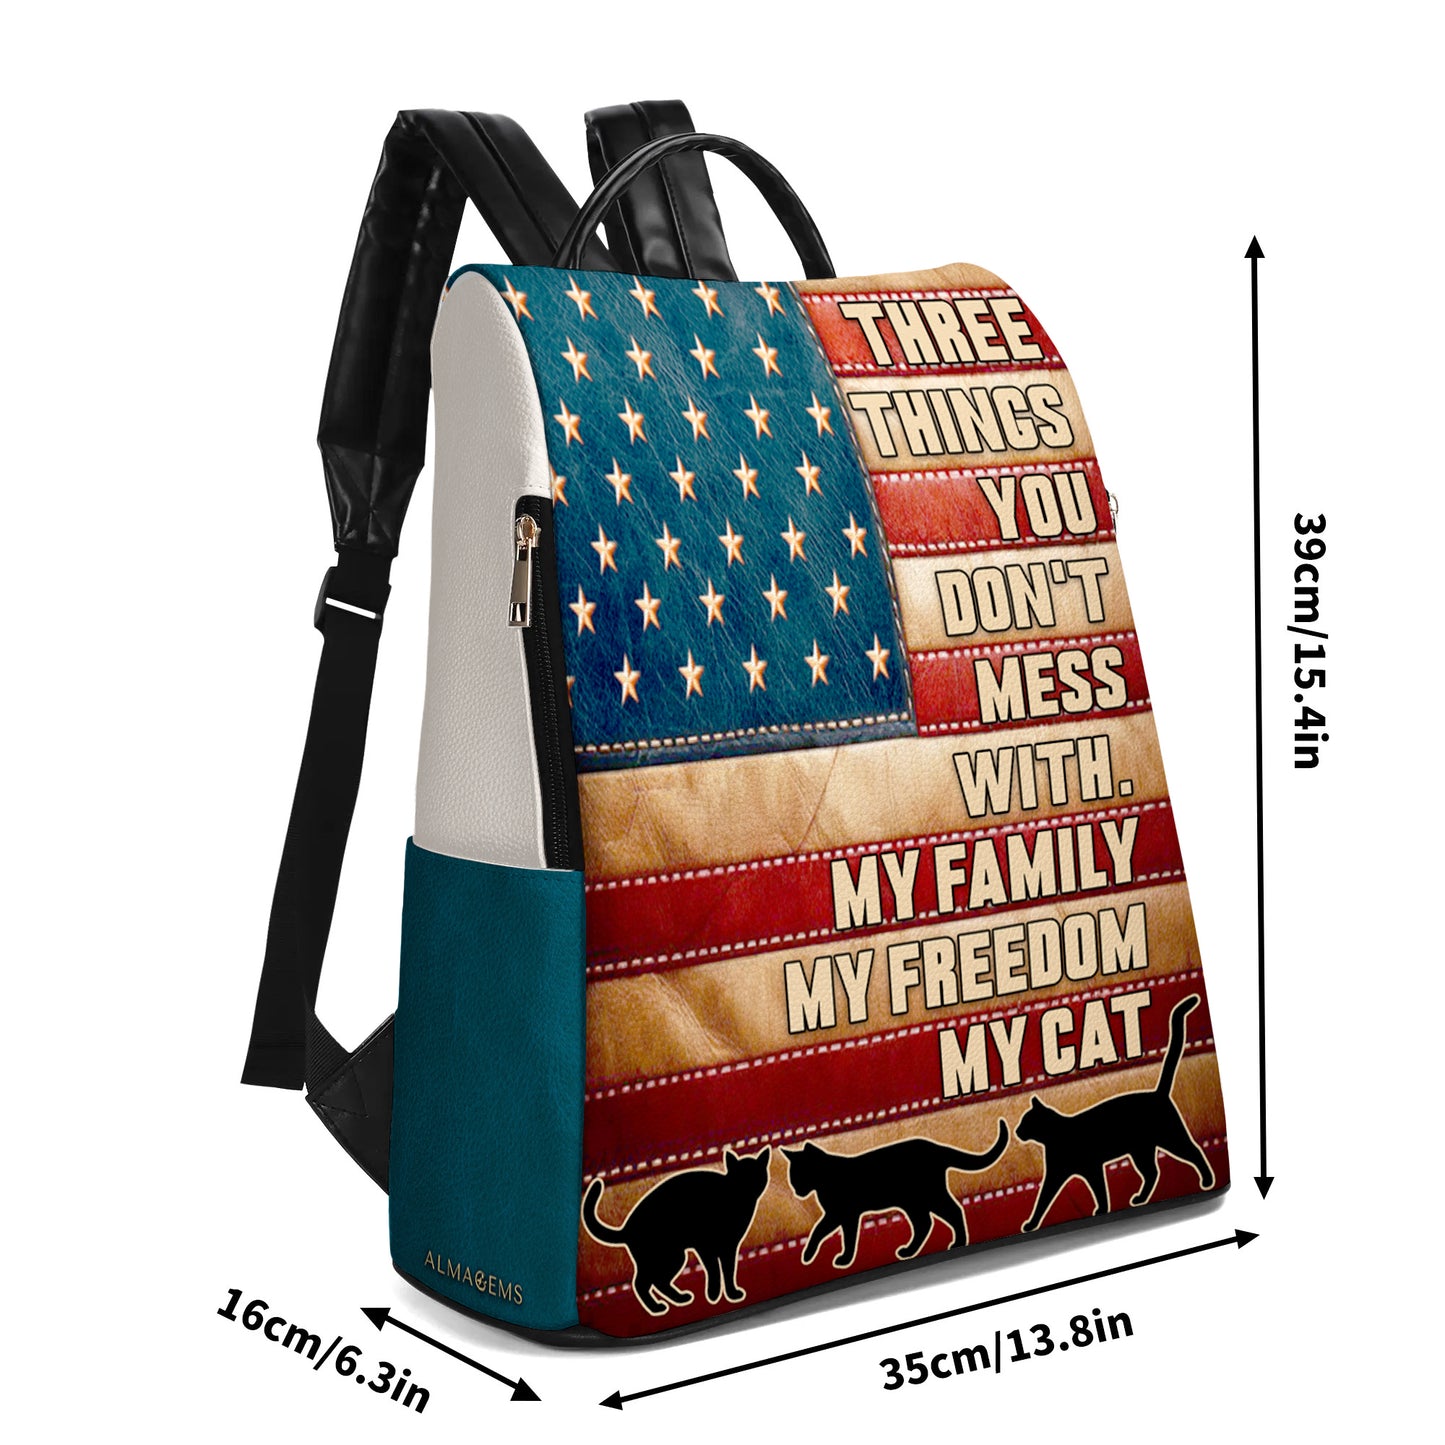 Three Things You Don't Mess With - Personalized Leather BackPack - BP_CAT03